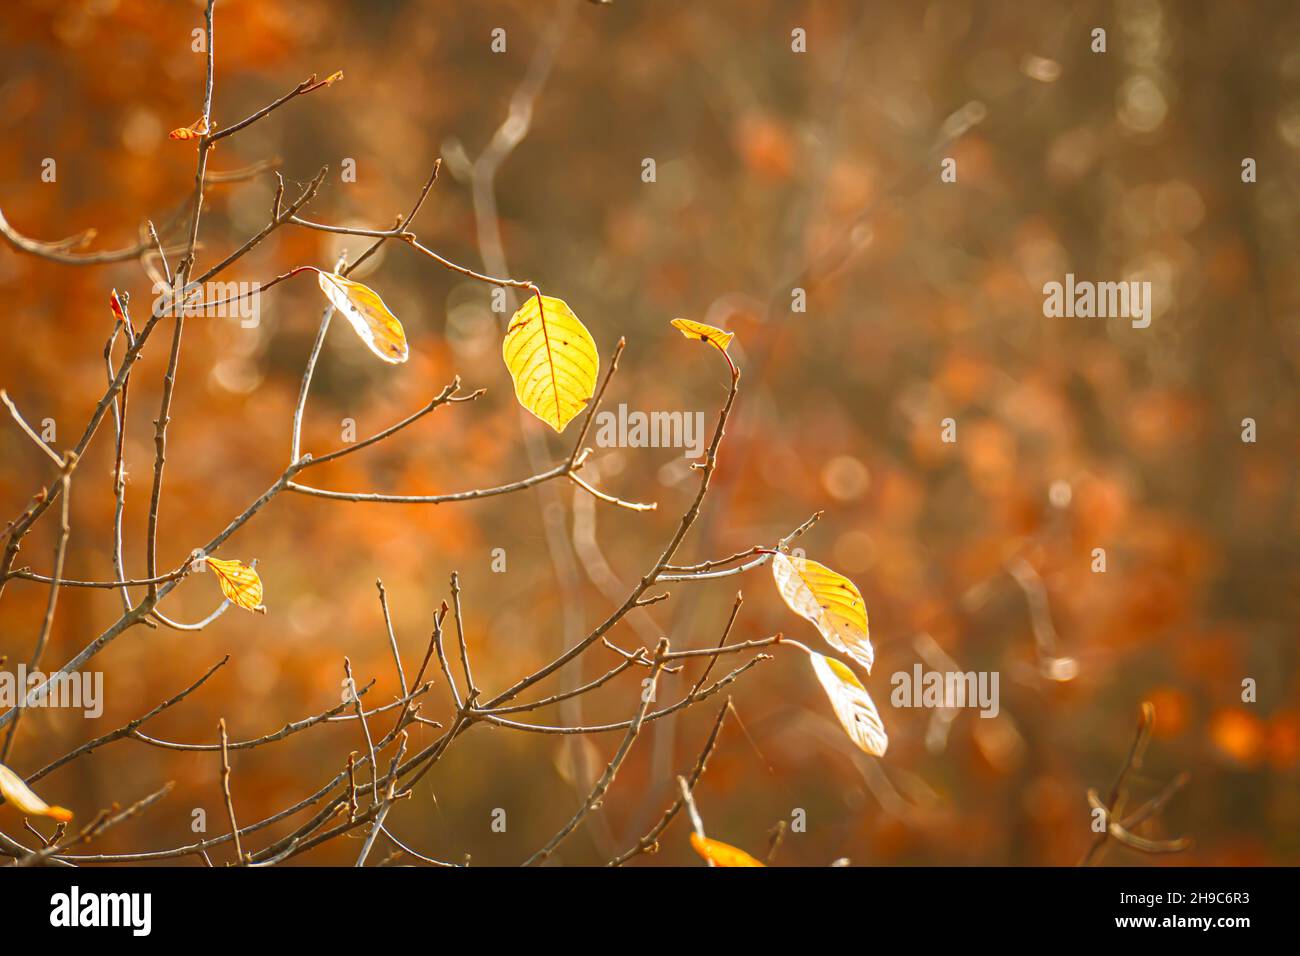 Yellow leaves on an elm branch in the backlight of the autumn sun Stock Photo